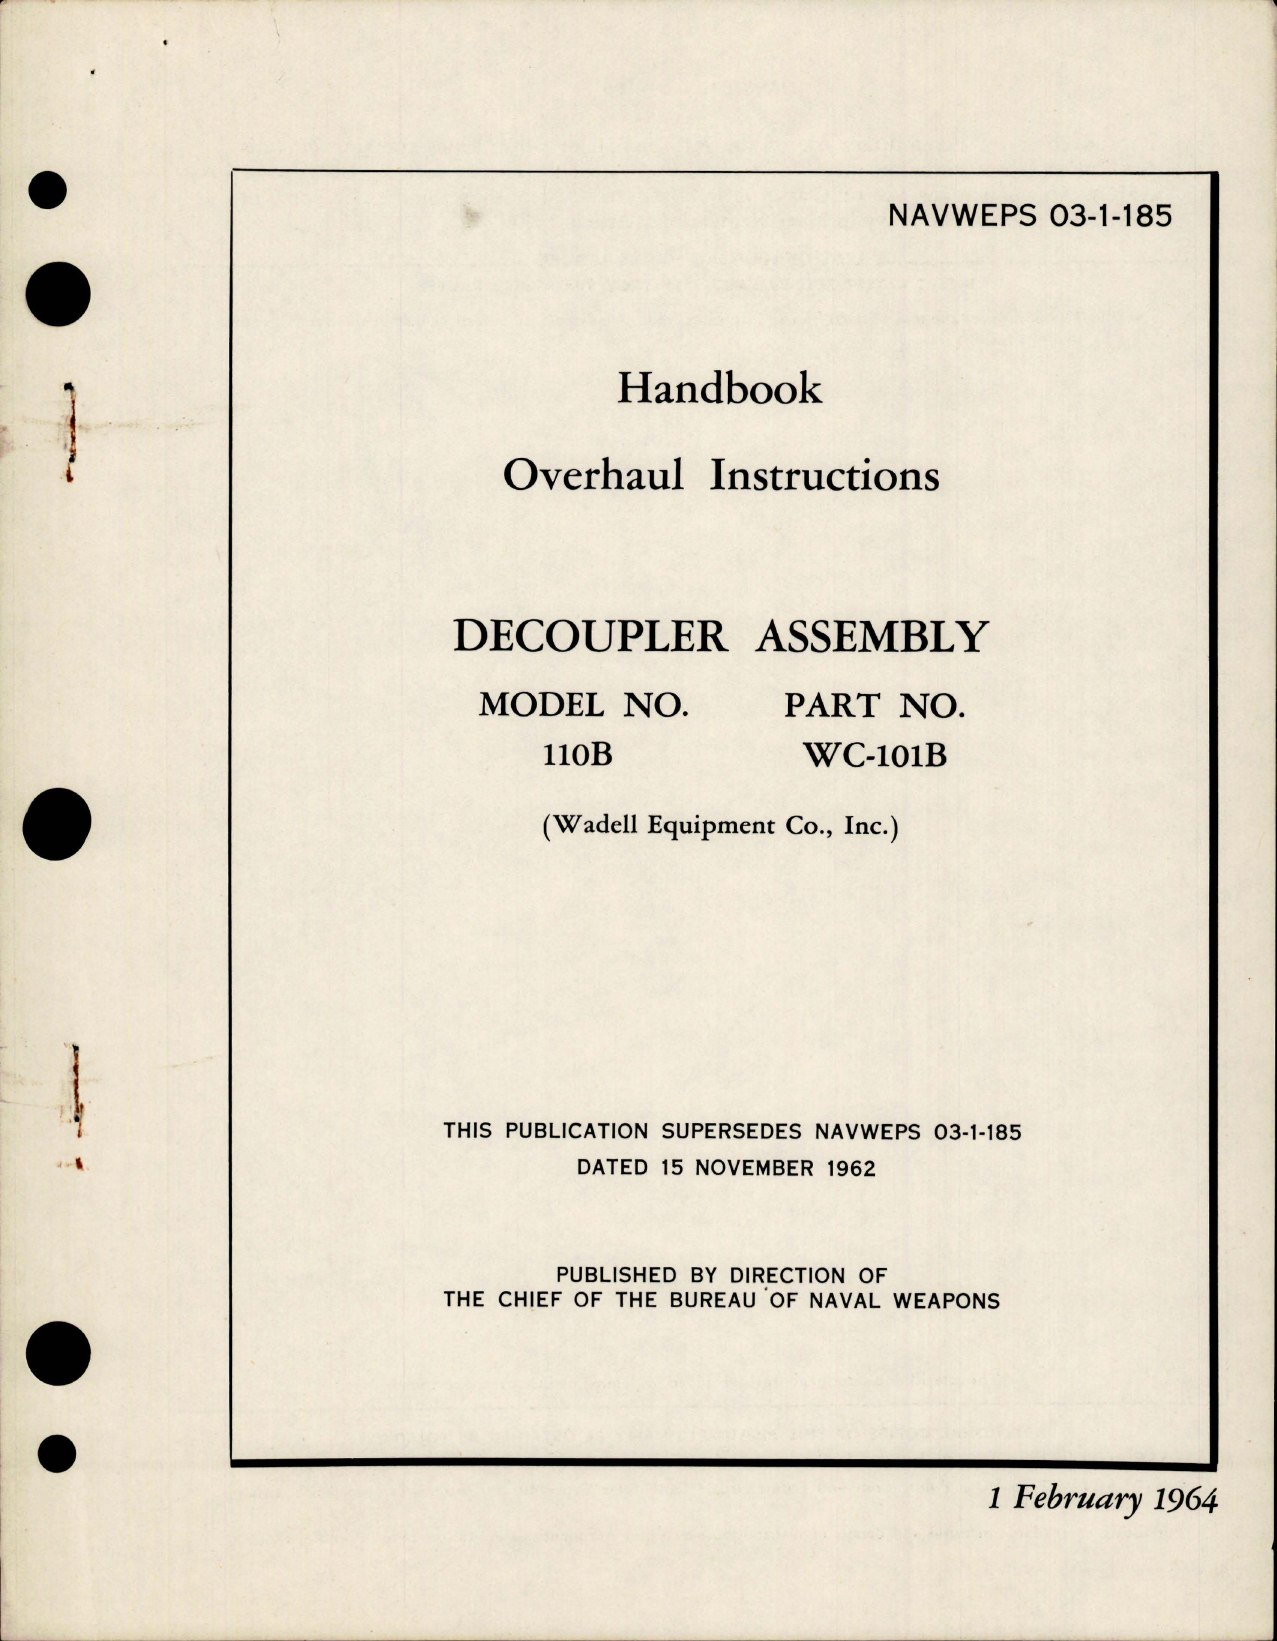 Sample page 1 from AirCorps Library document: Overhaul Instructions for Decoupler Assembly - Model 110B - Part WC-101B